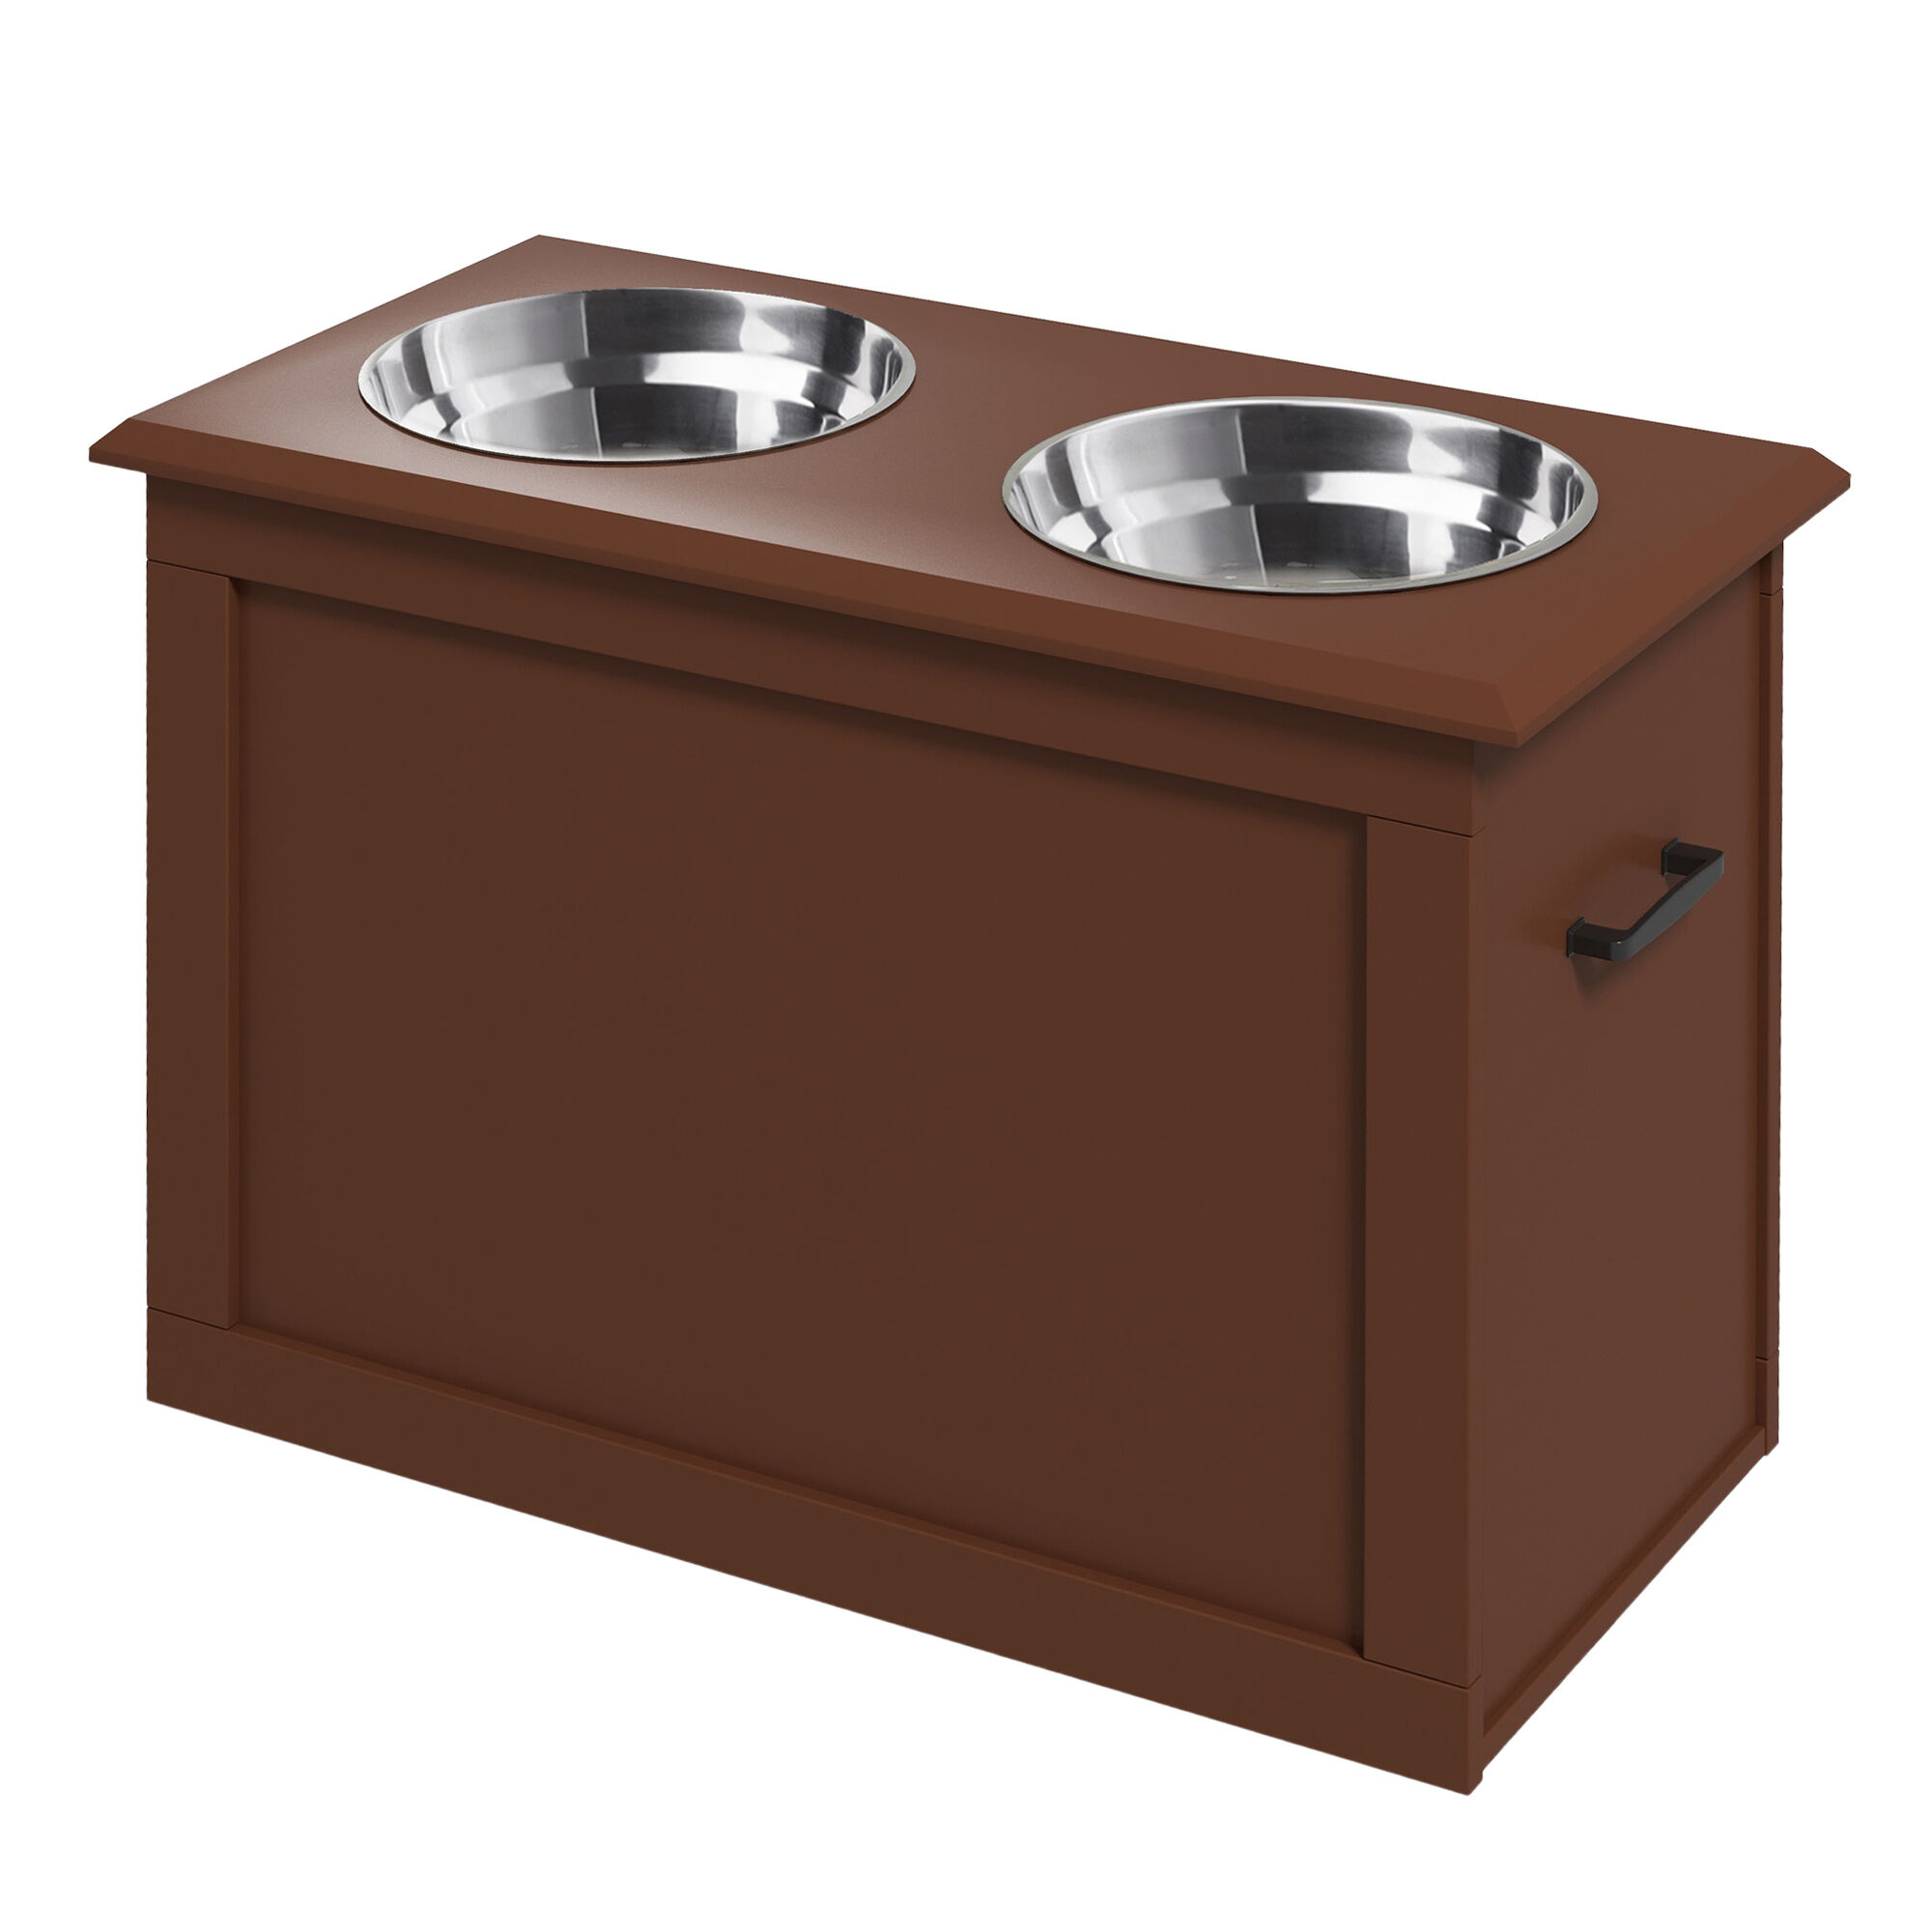 PawHut Raised Bowl Dog Feeder with 2 Steel Bowls and Storage, Brown